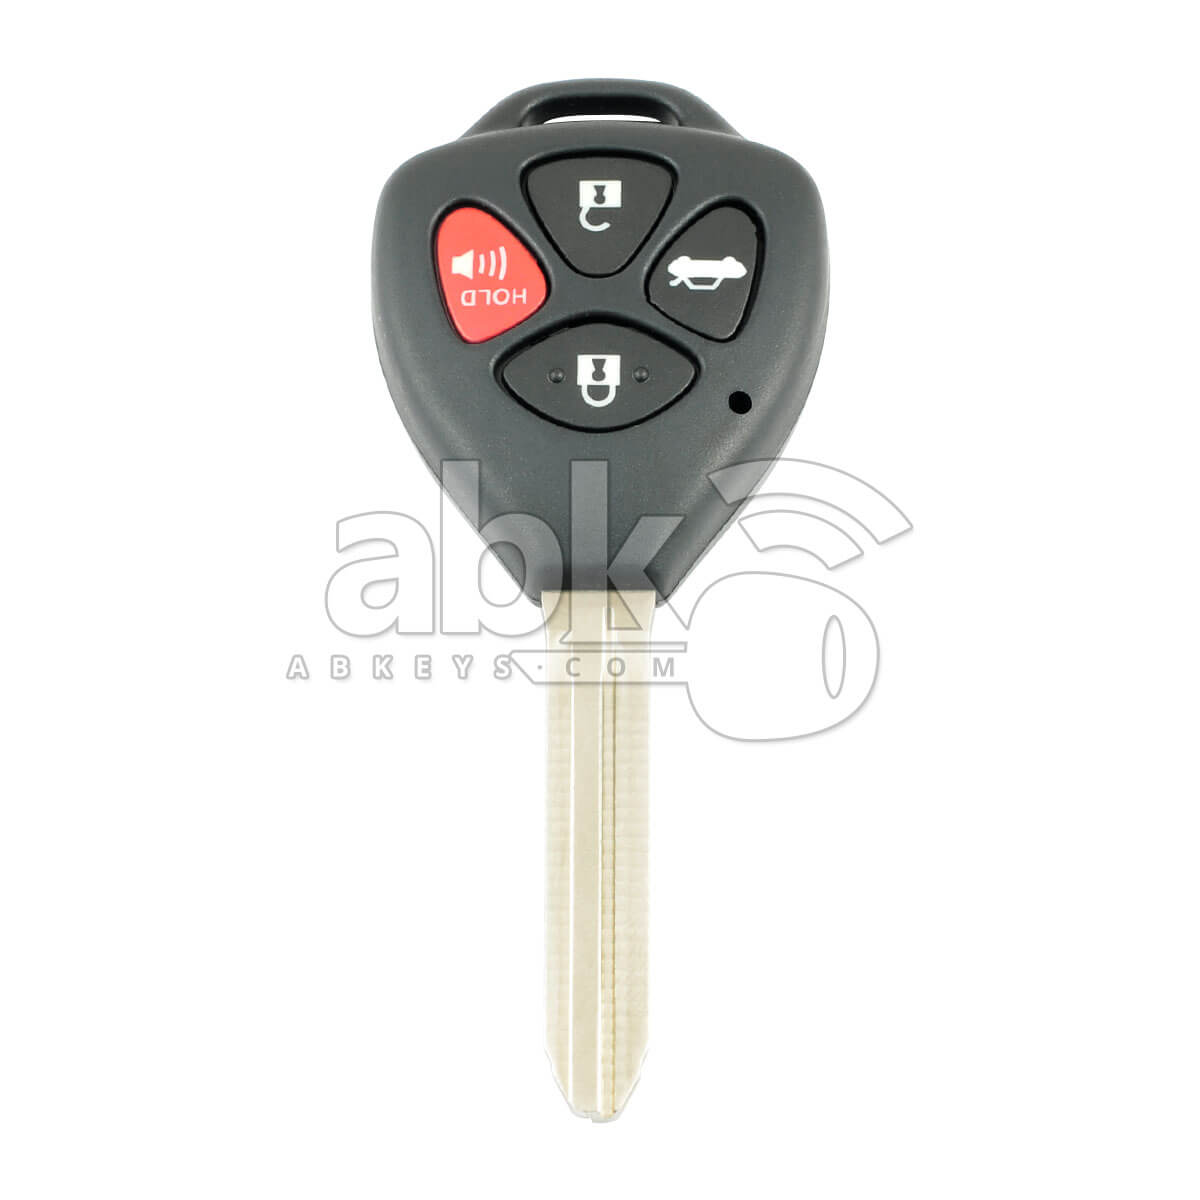 Genuine Toyota Corolla 2010+ Key Head Remote 4Buttons 89070-02620 89070-12820 315MHz GQ4-29T TOY43 -